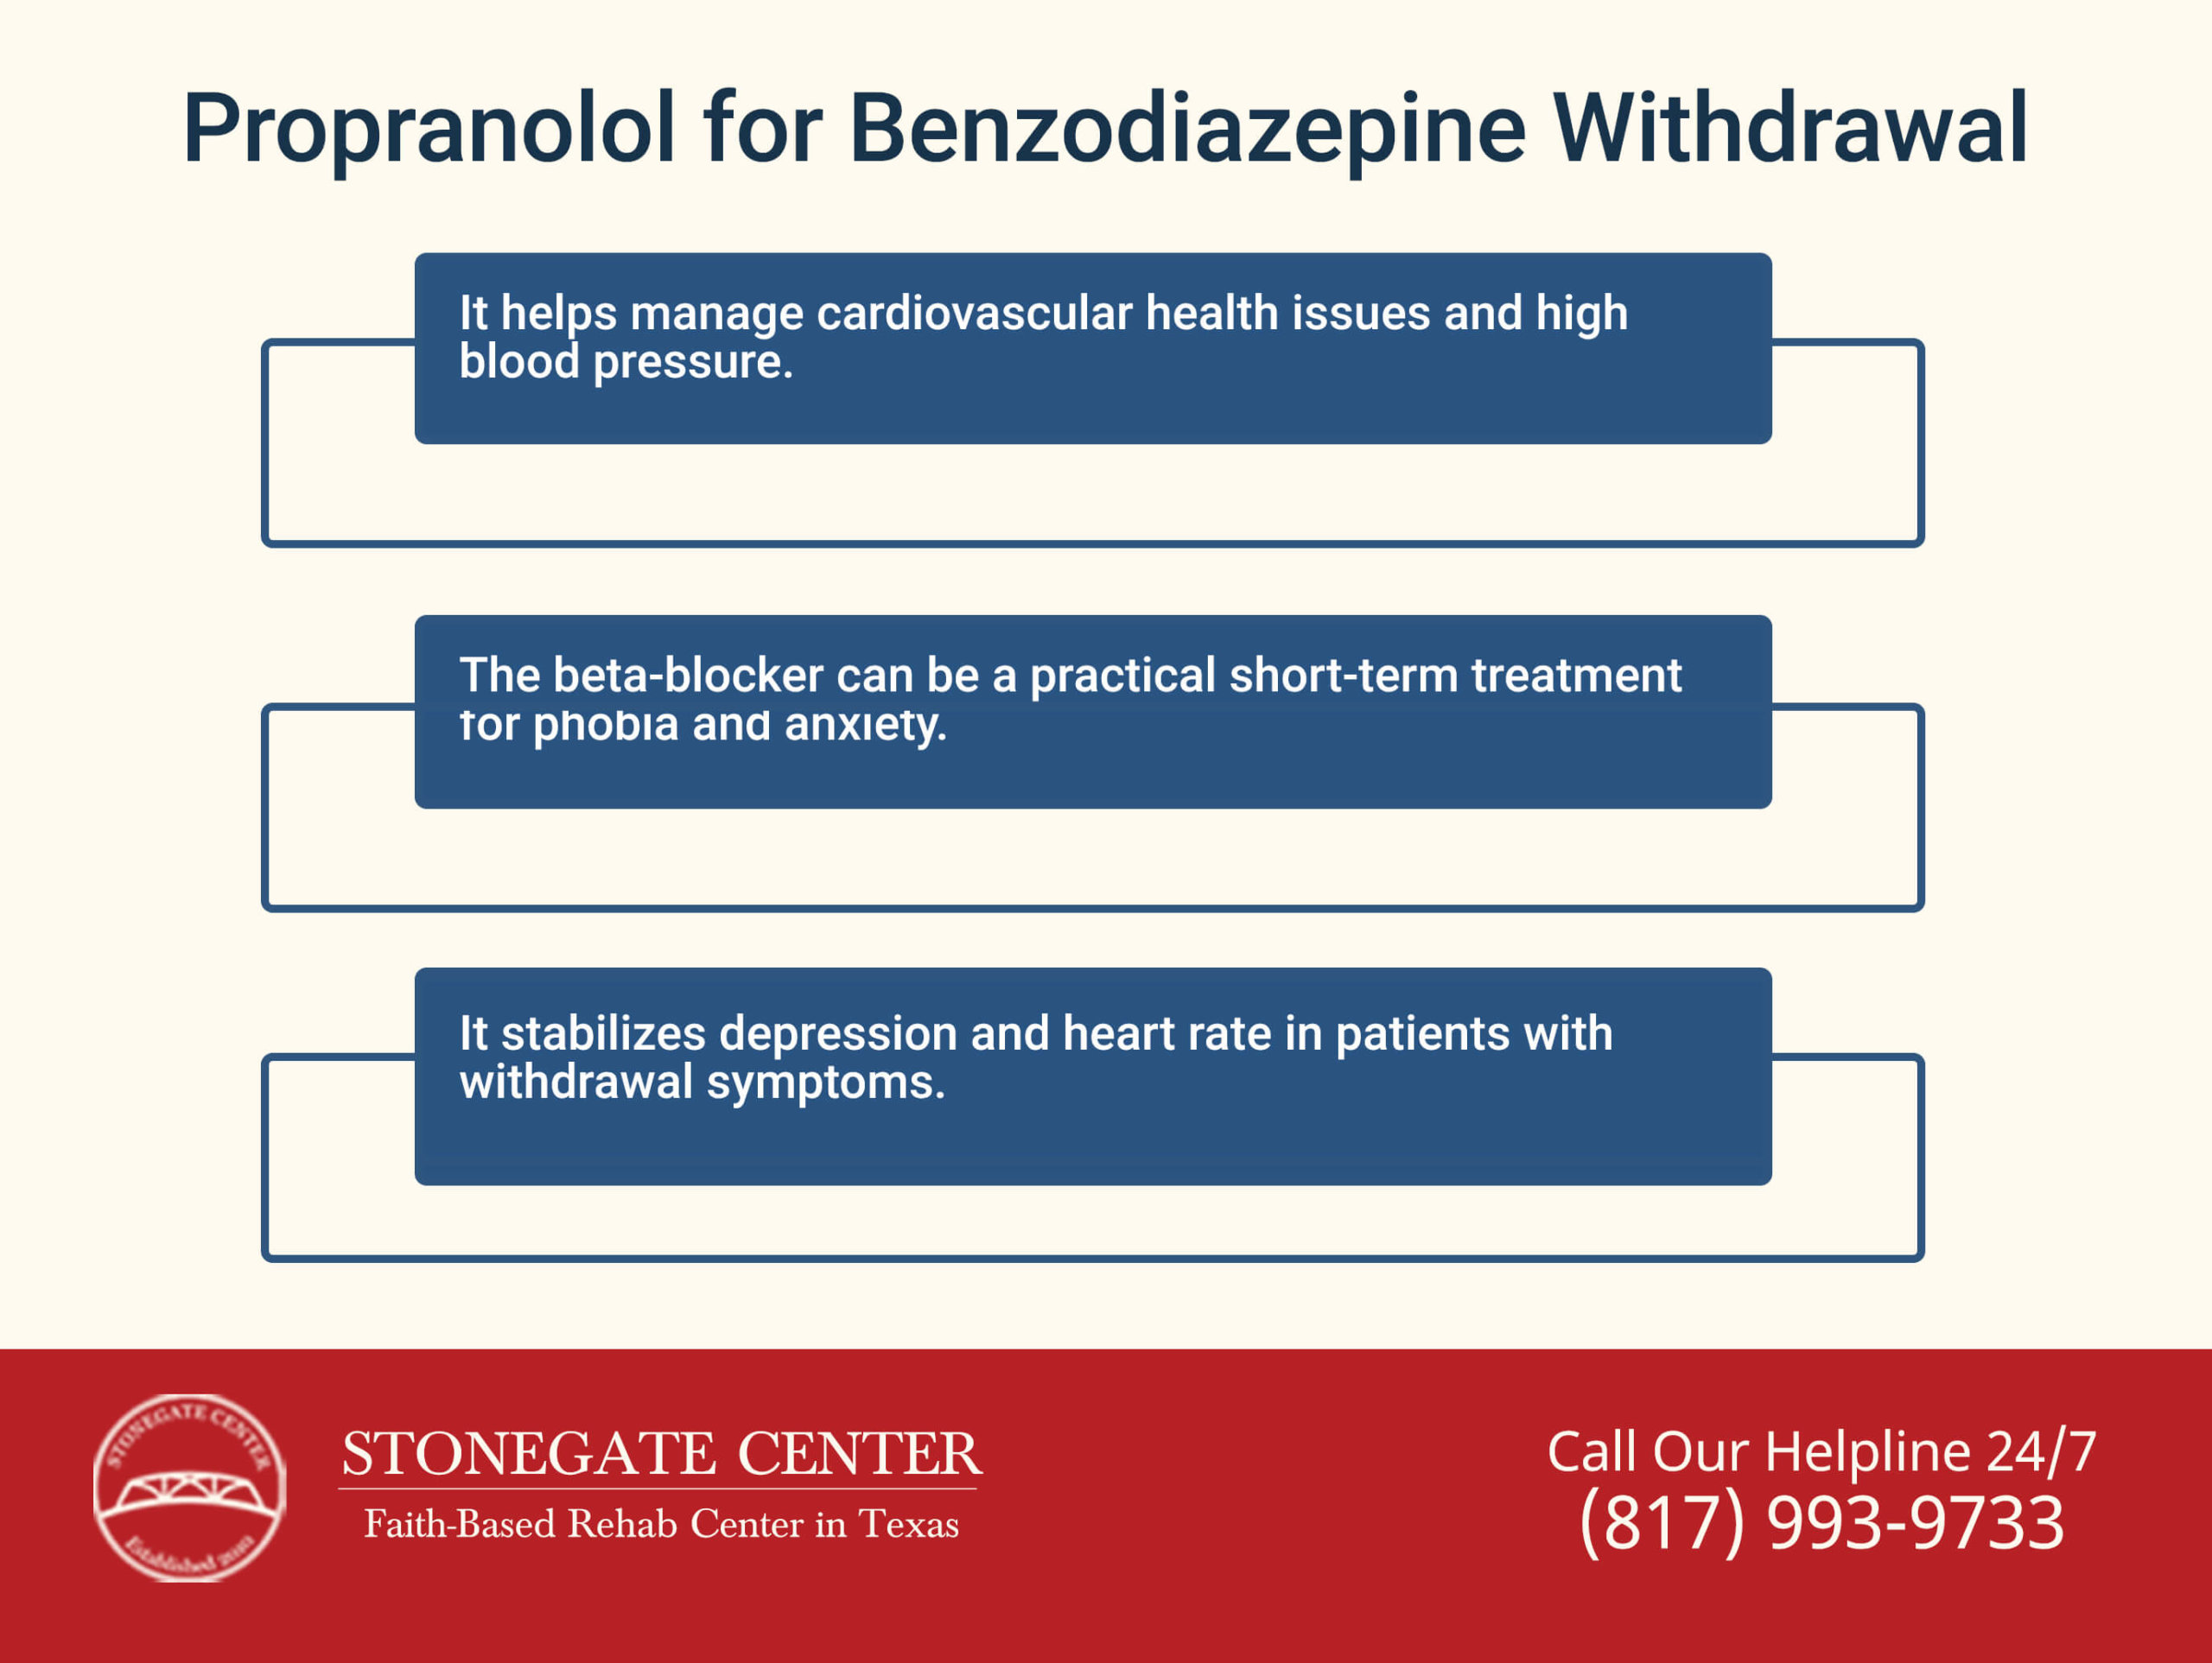 Stonegate Center Blog - Is Propranolol One of the Most Common Medications Given at Detox Centers? - Propranolol for Benzodiazepine Withdrawal